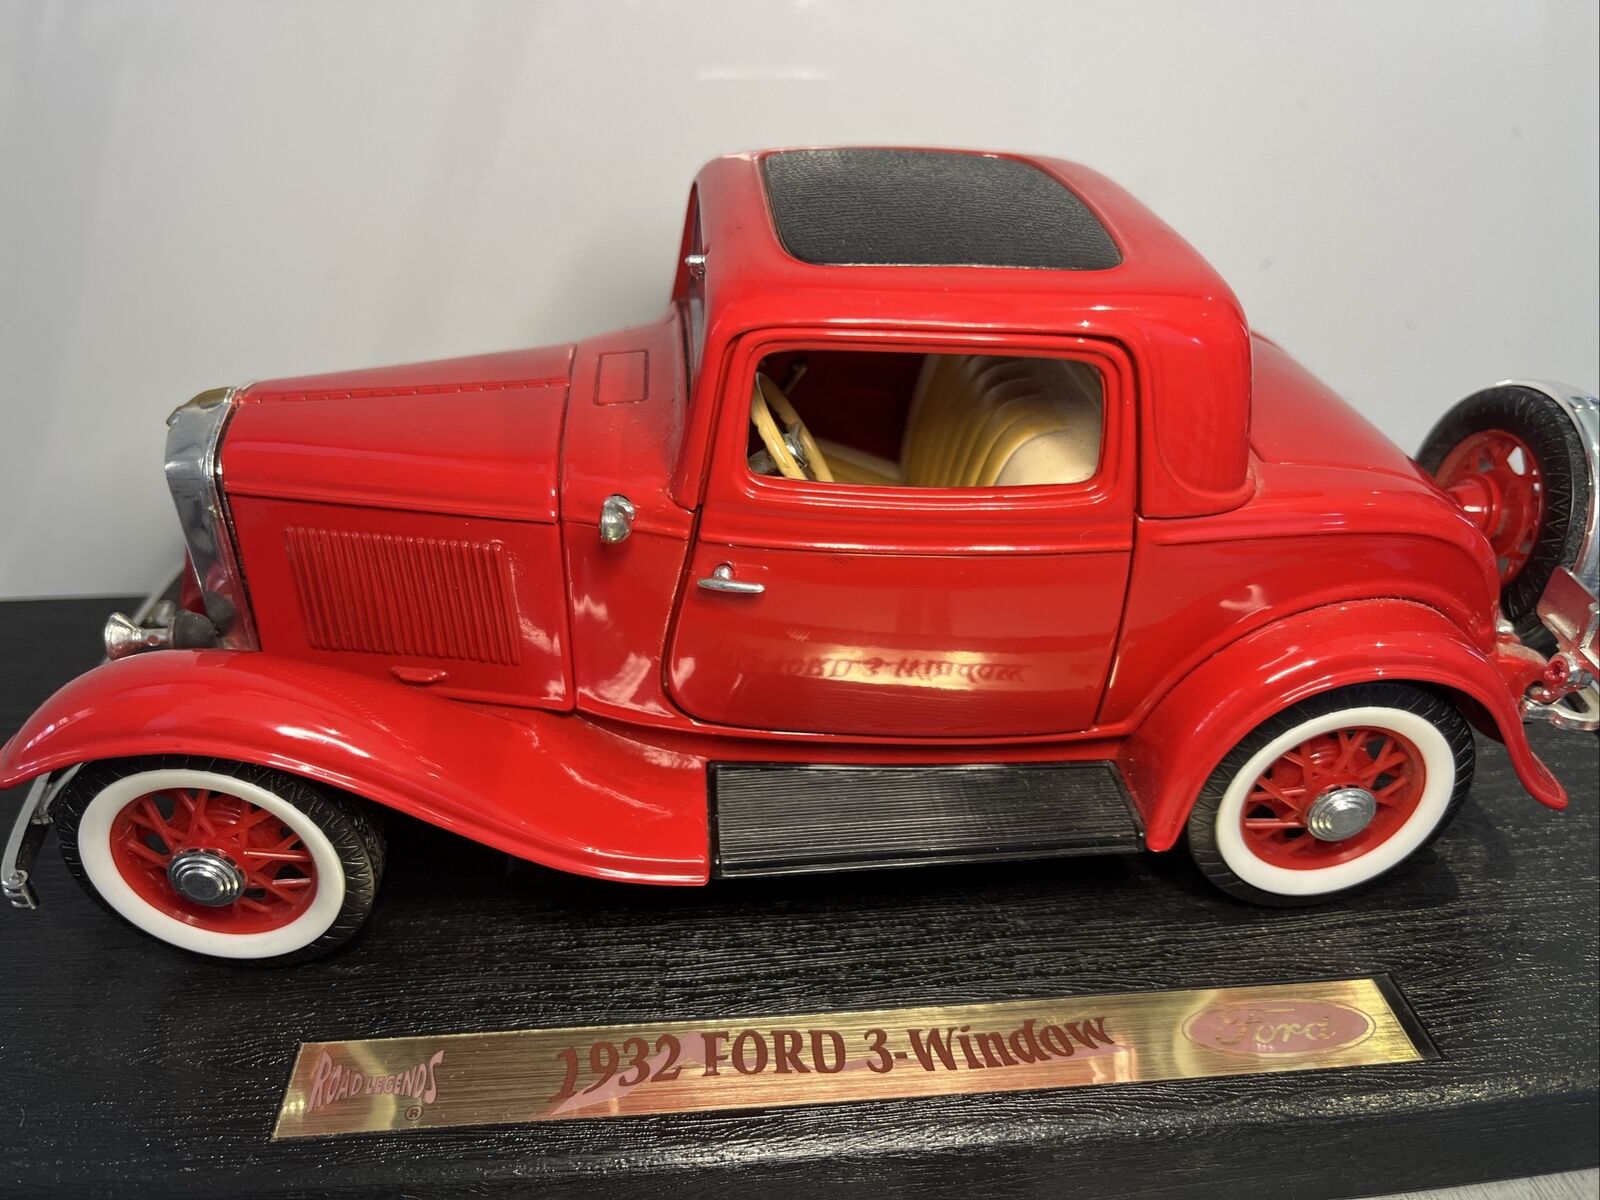 1932 Ford 3 - Window Road Legends Car Vintage Figurine Collectable Decor